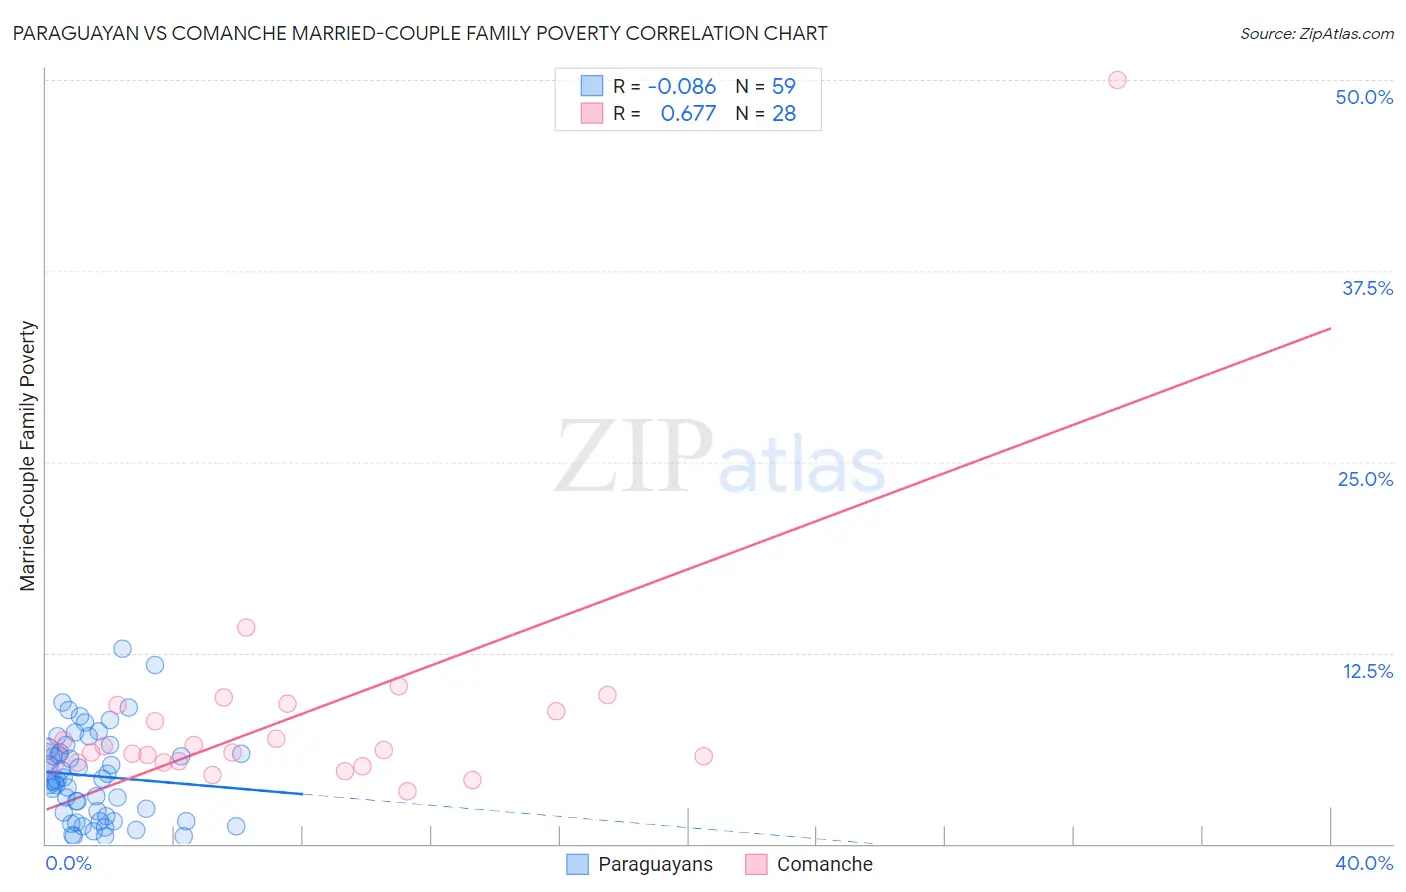 Paraguayan vs Comanche Married-Couple Family Poverty